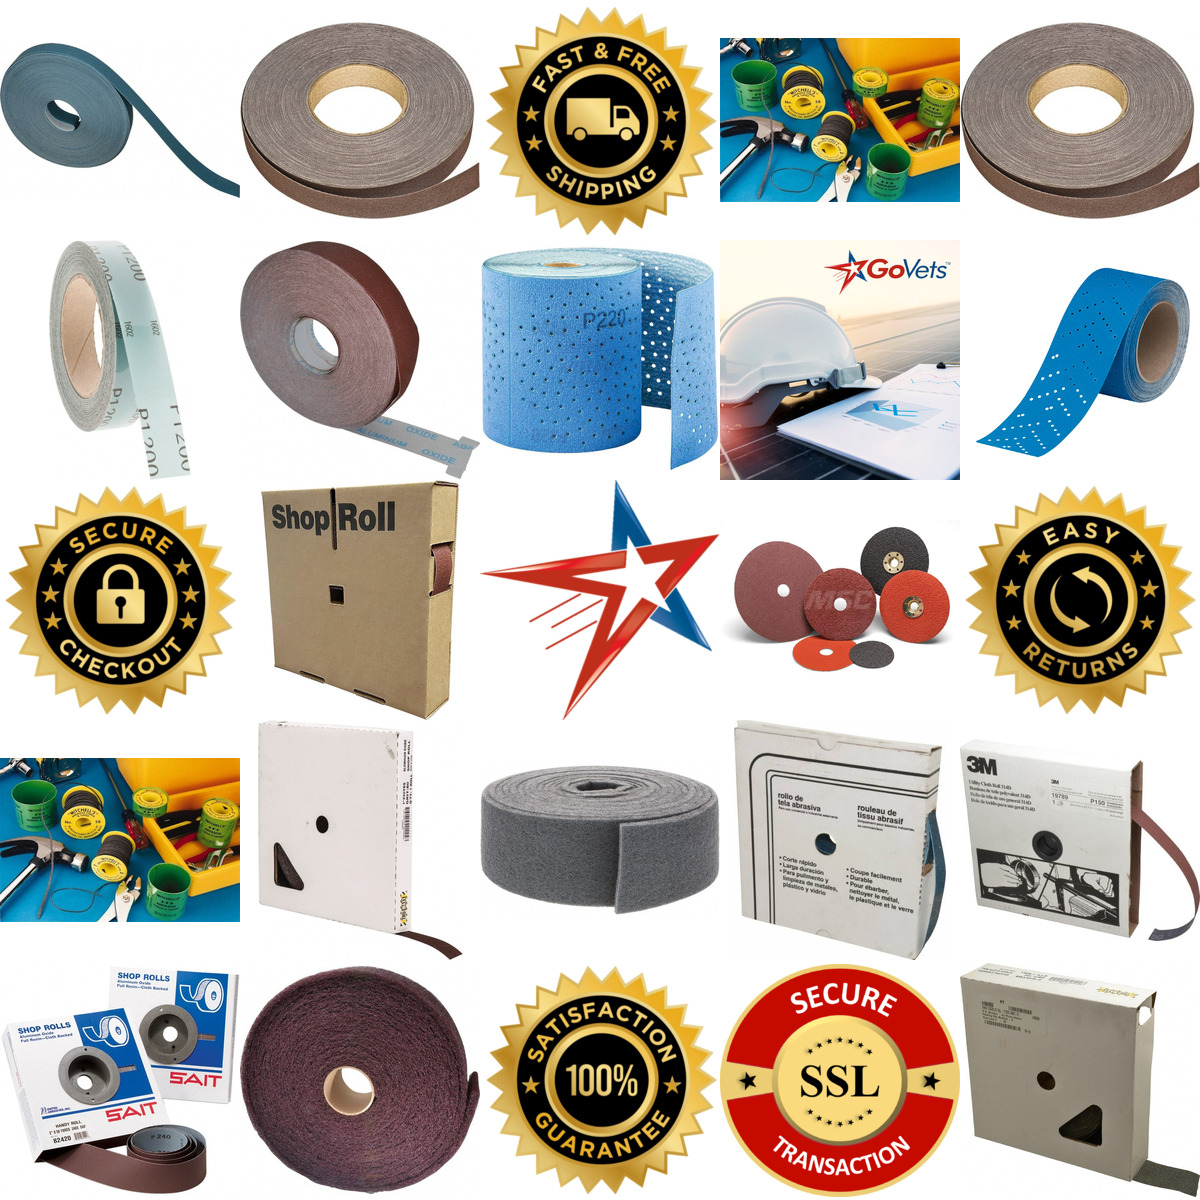 A selection of Rolls Cords and Tape products on GoVets